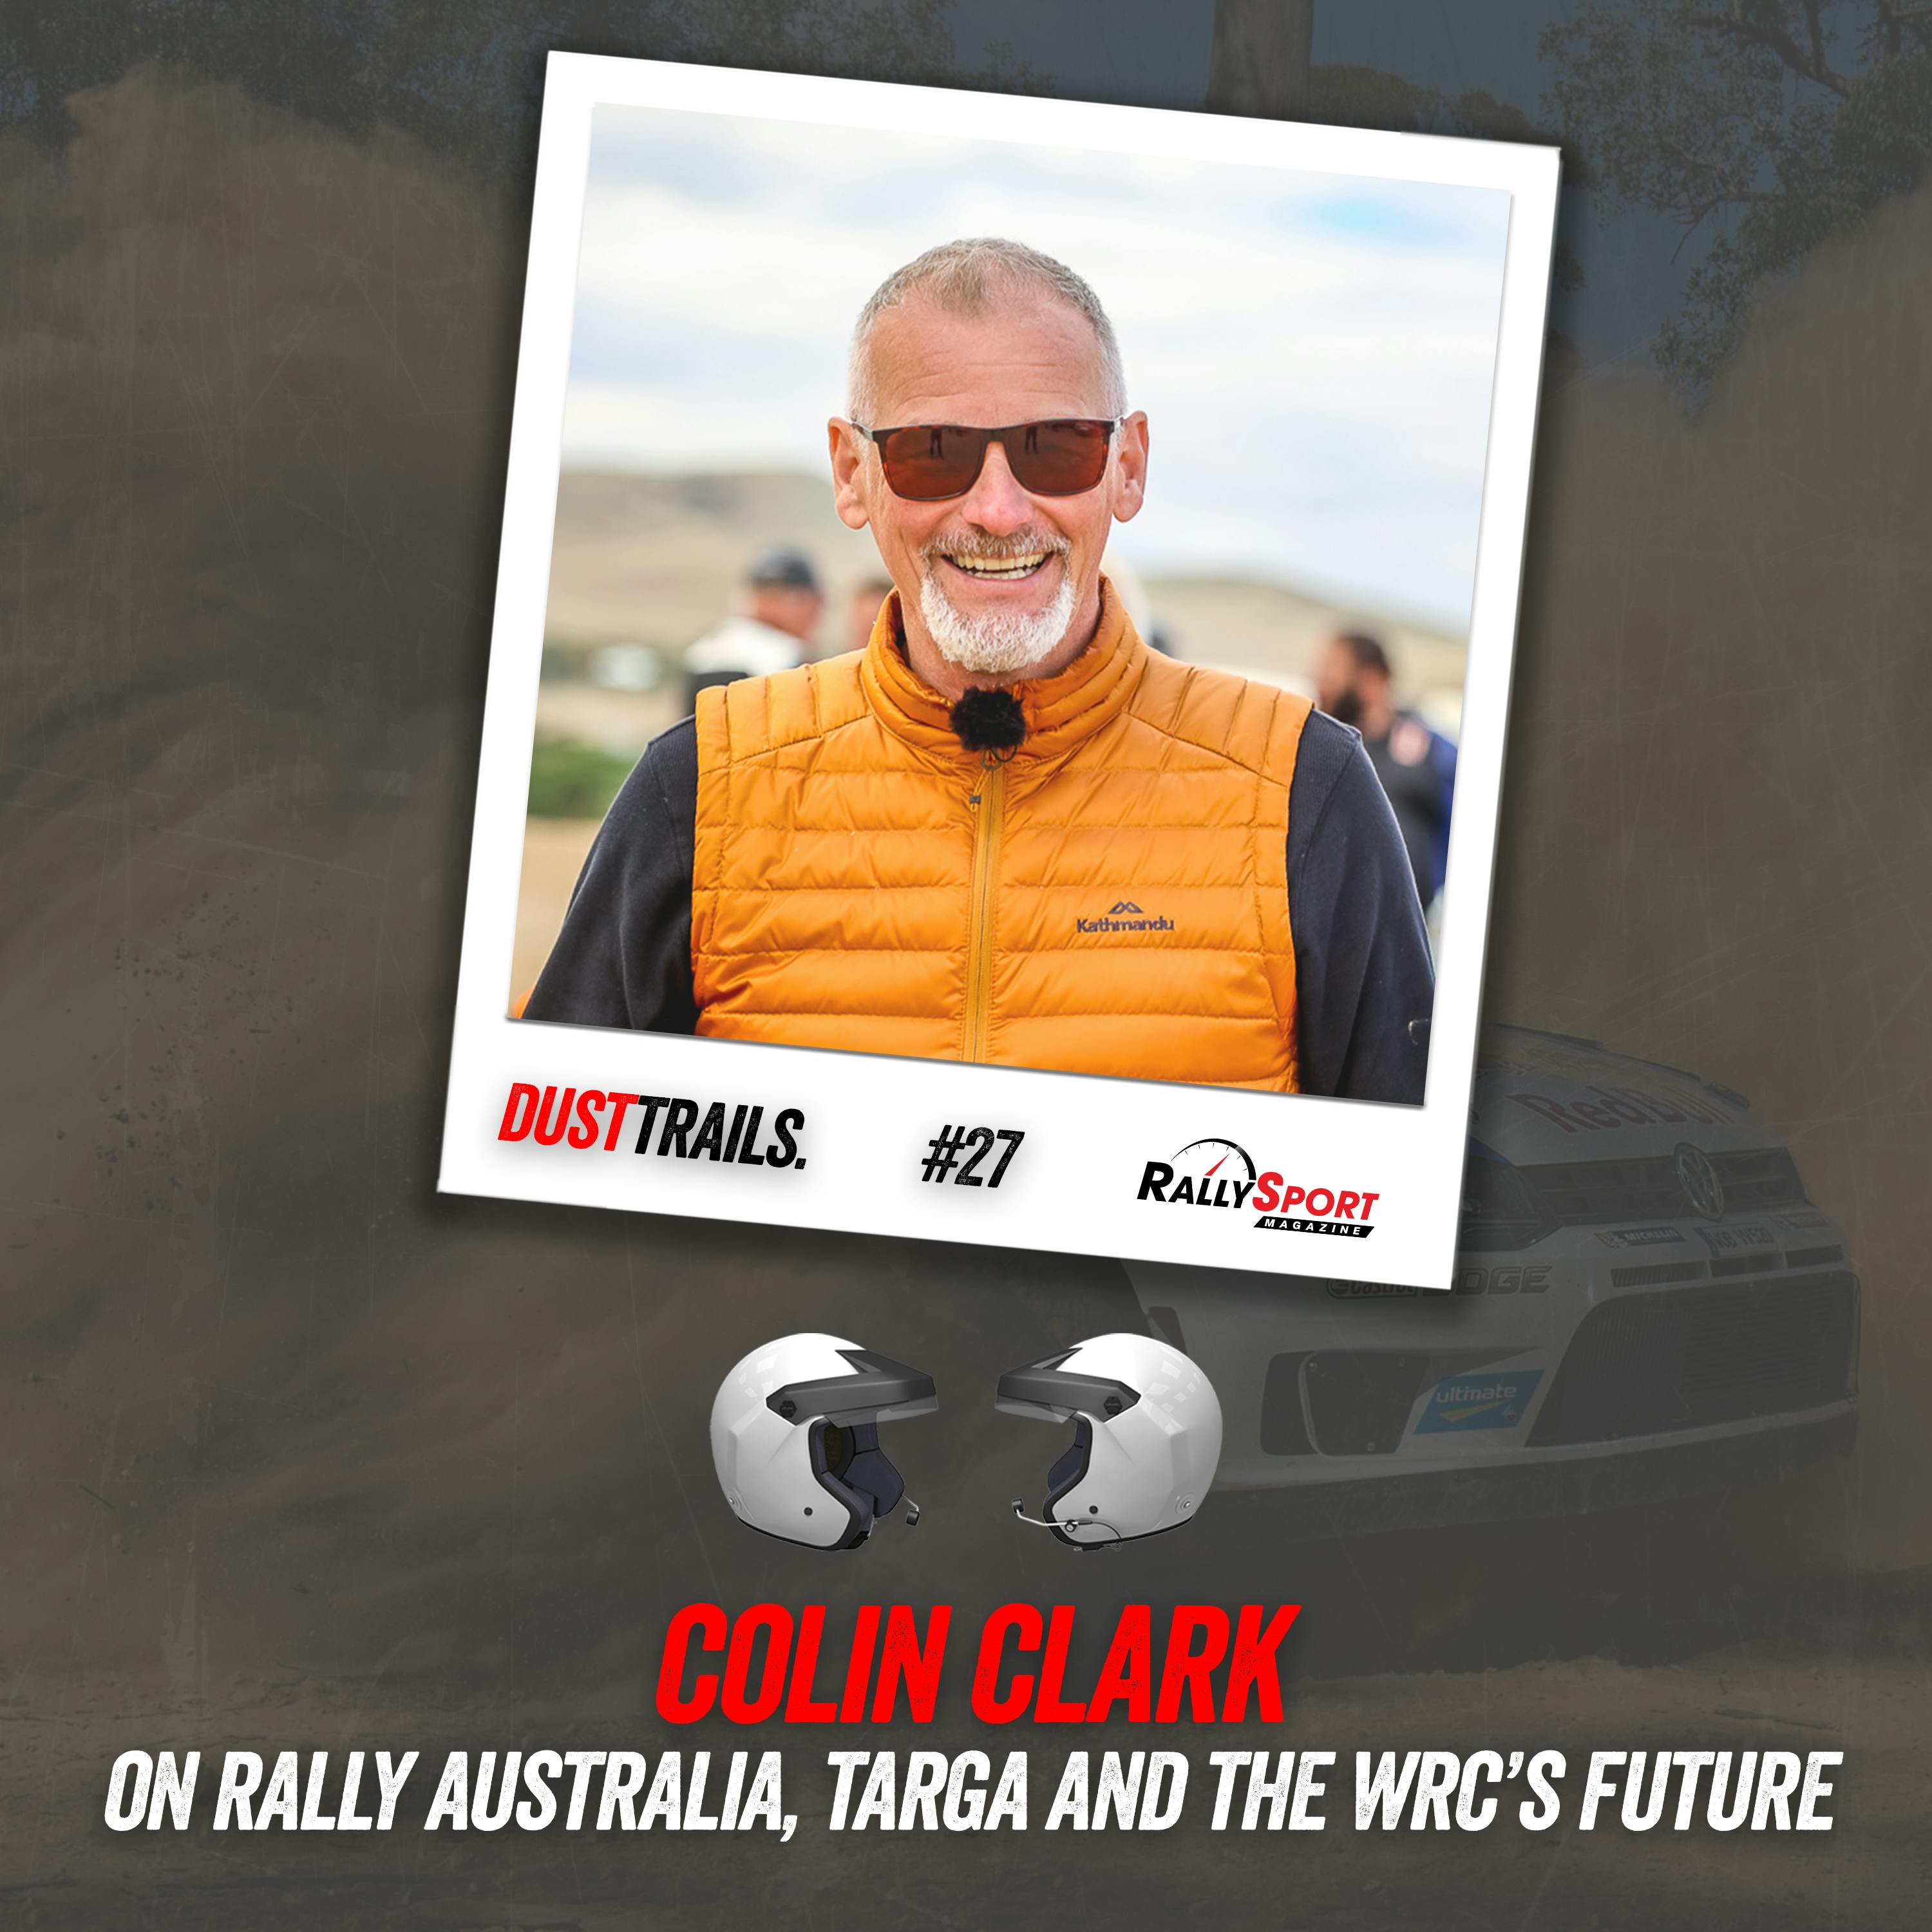 The ‘Voice of Rally’ gives his views on a changing rally world